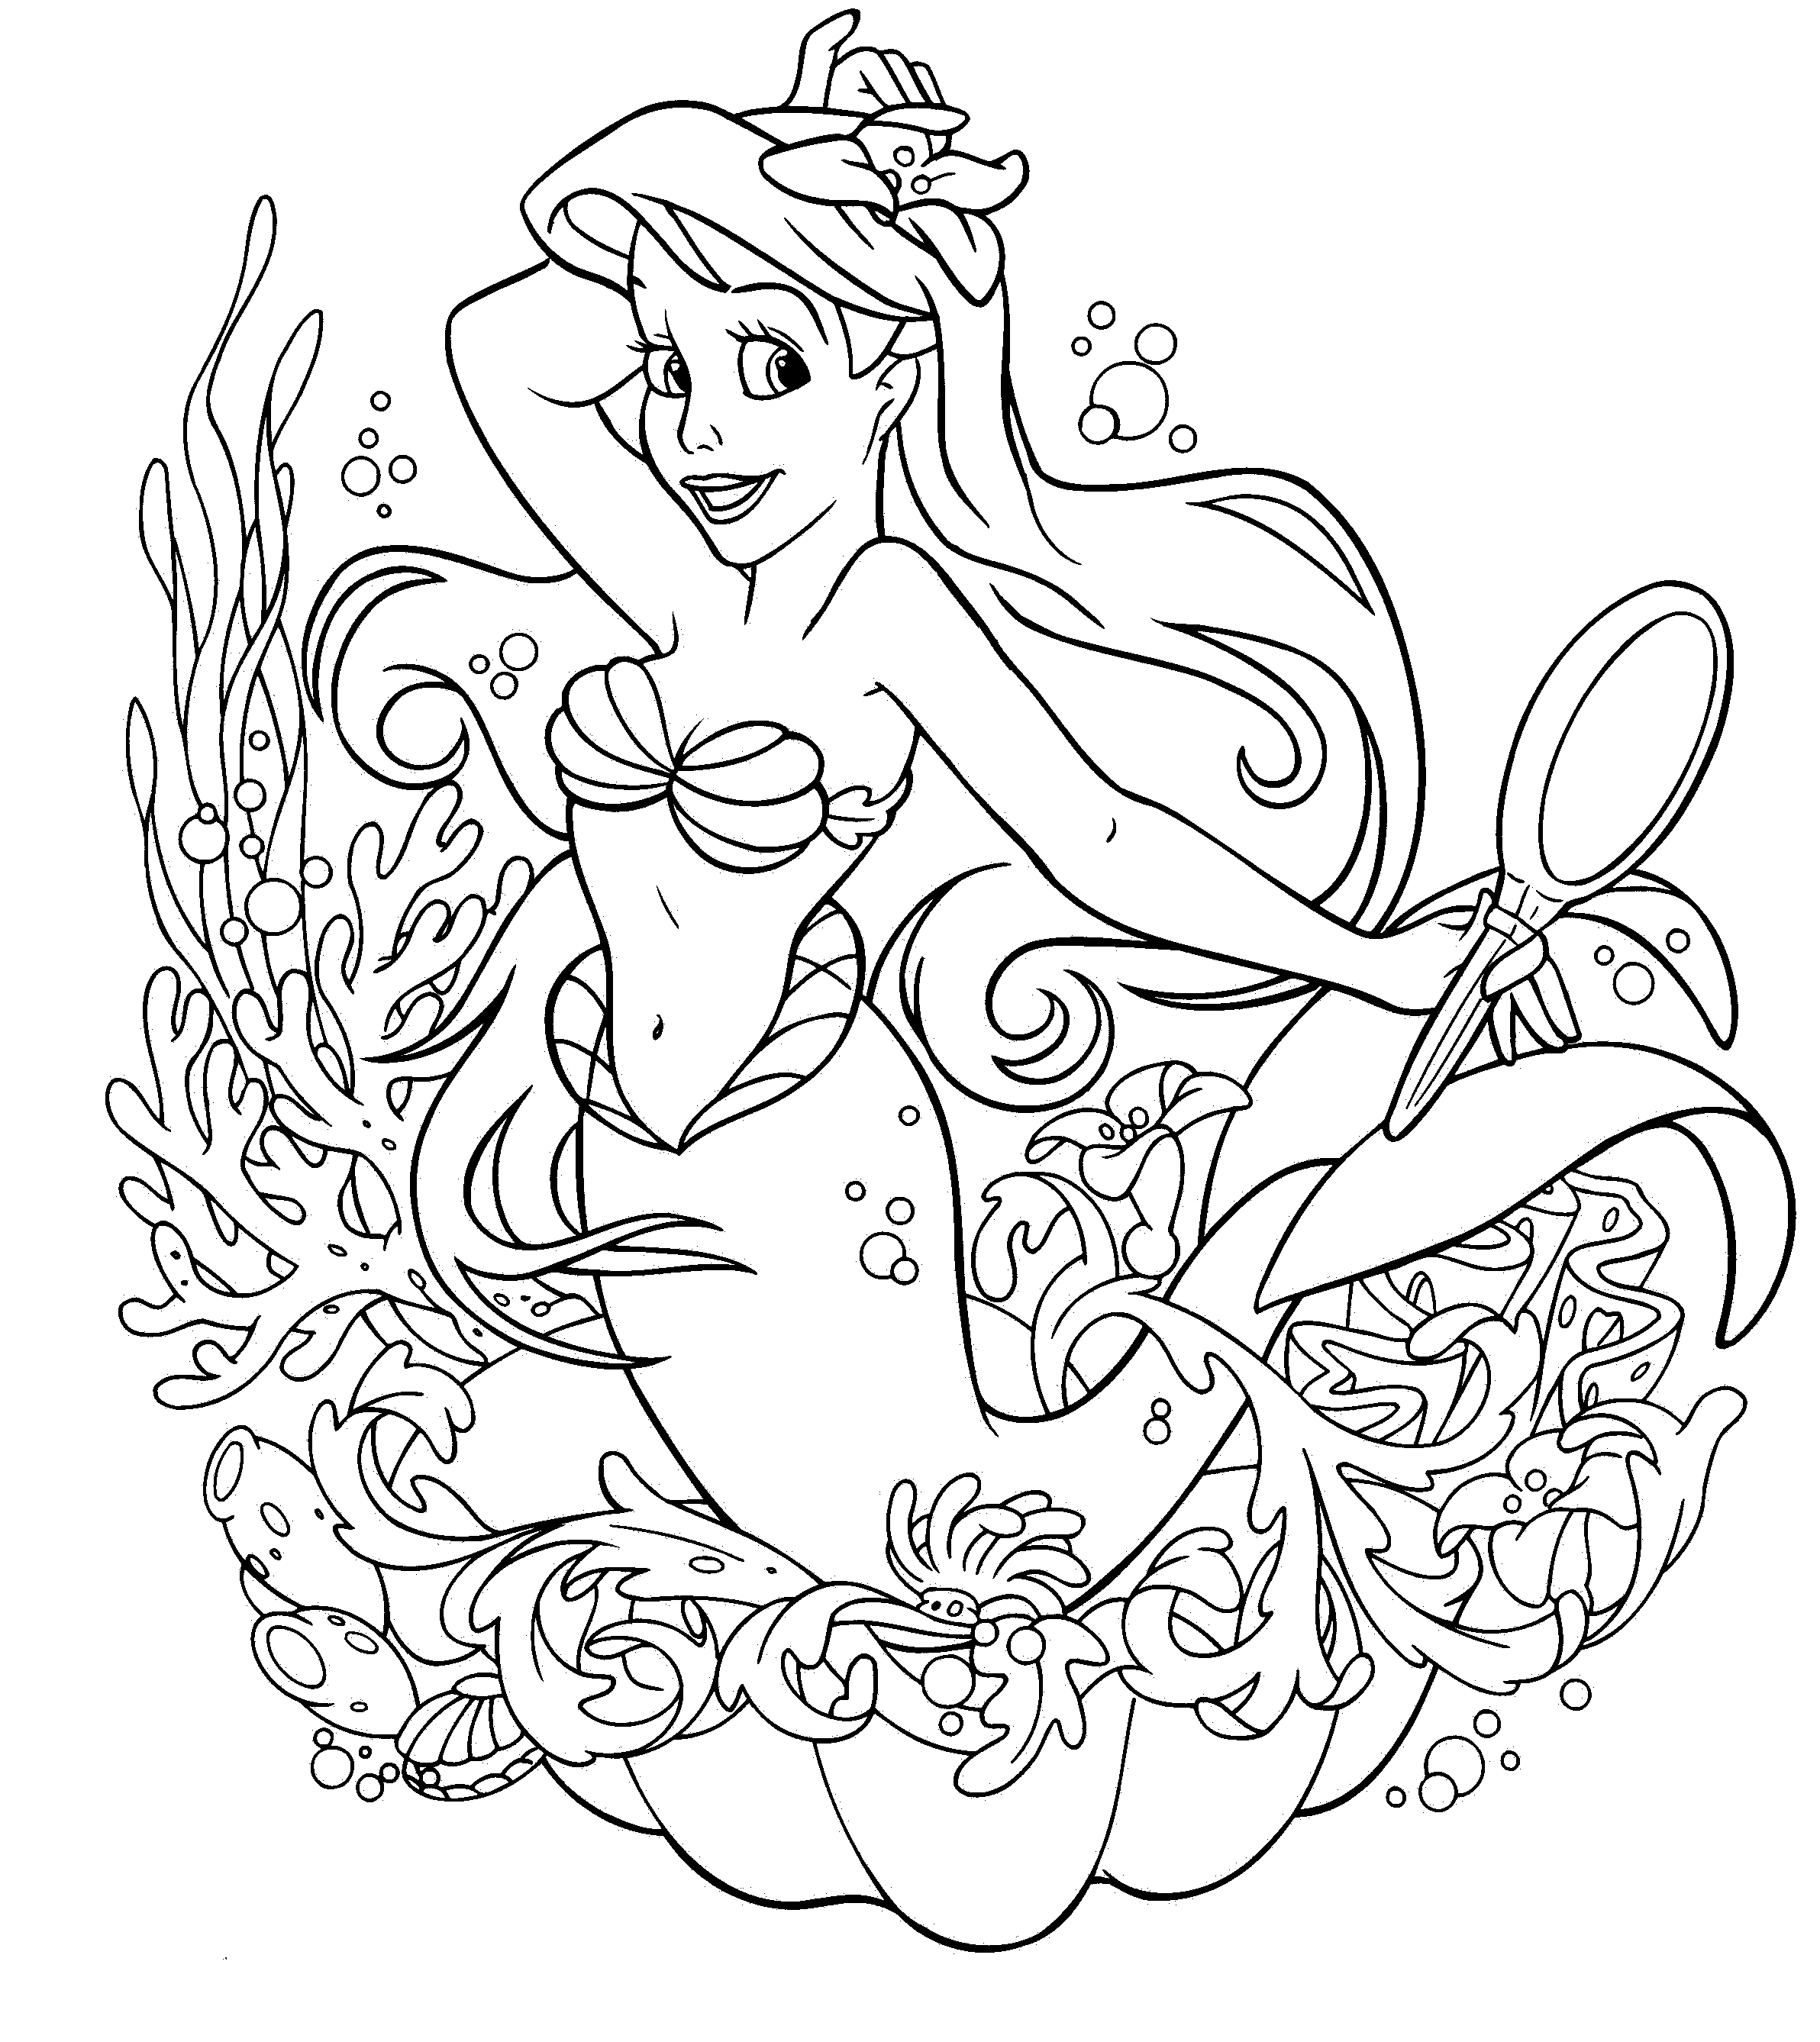 printable coloring pages of princesses disney princesses best coloring pages free coloring coloring princesses pages printable of 